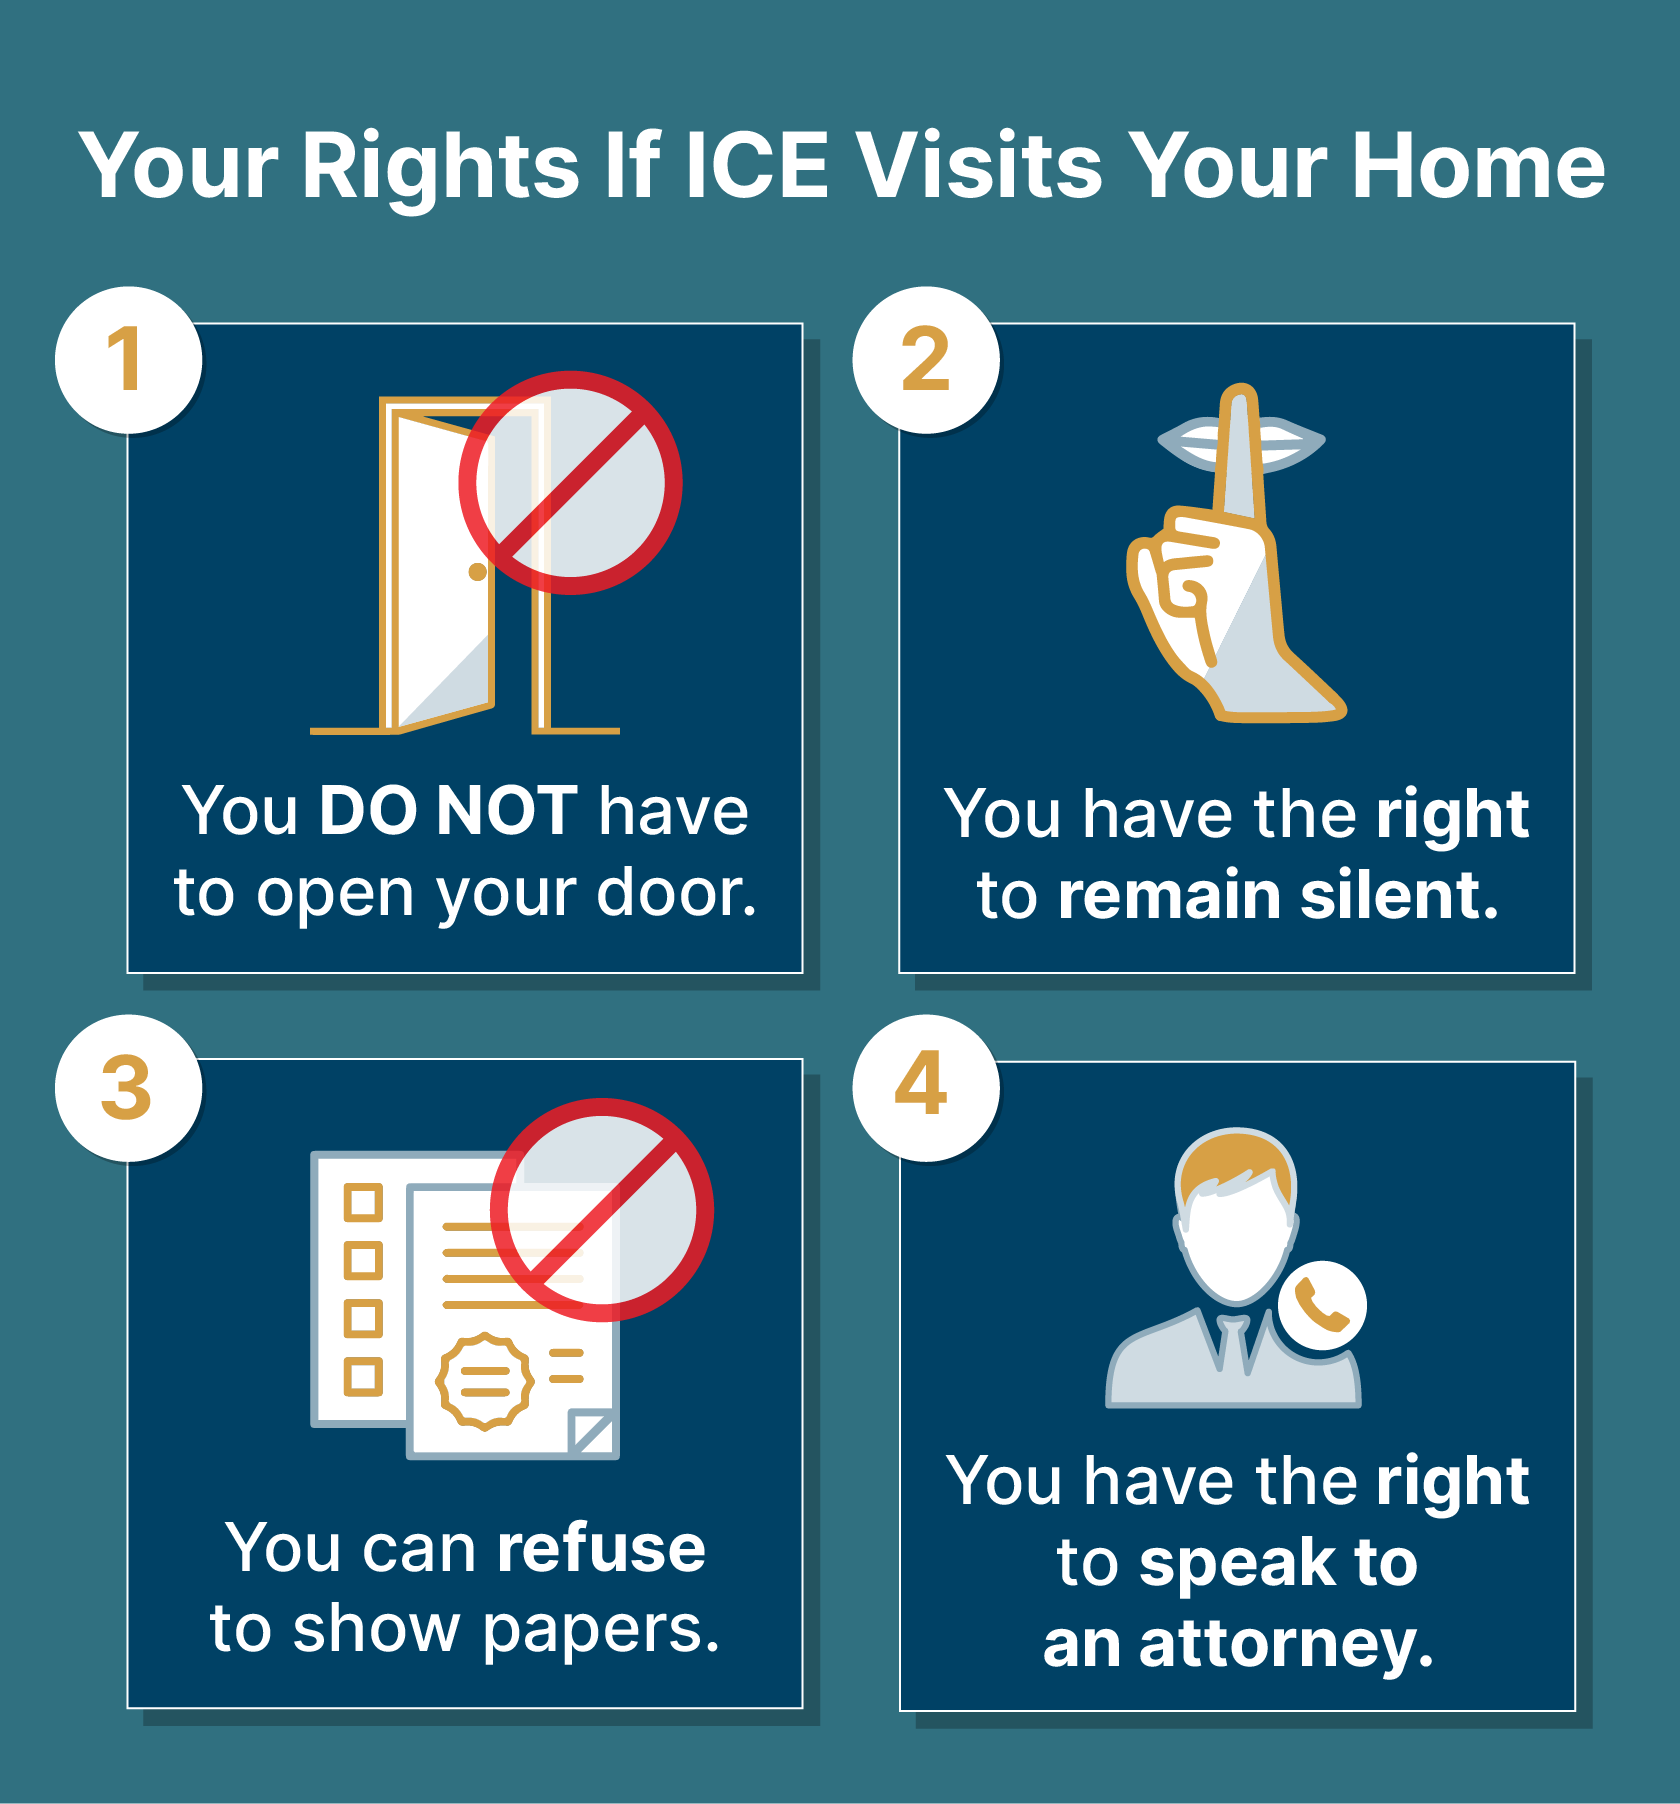 Your Rights if Ice visits your home graphic